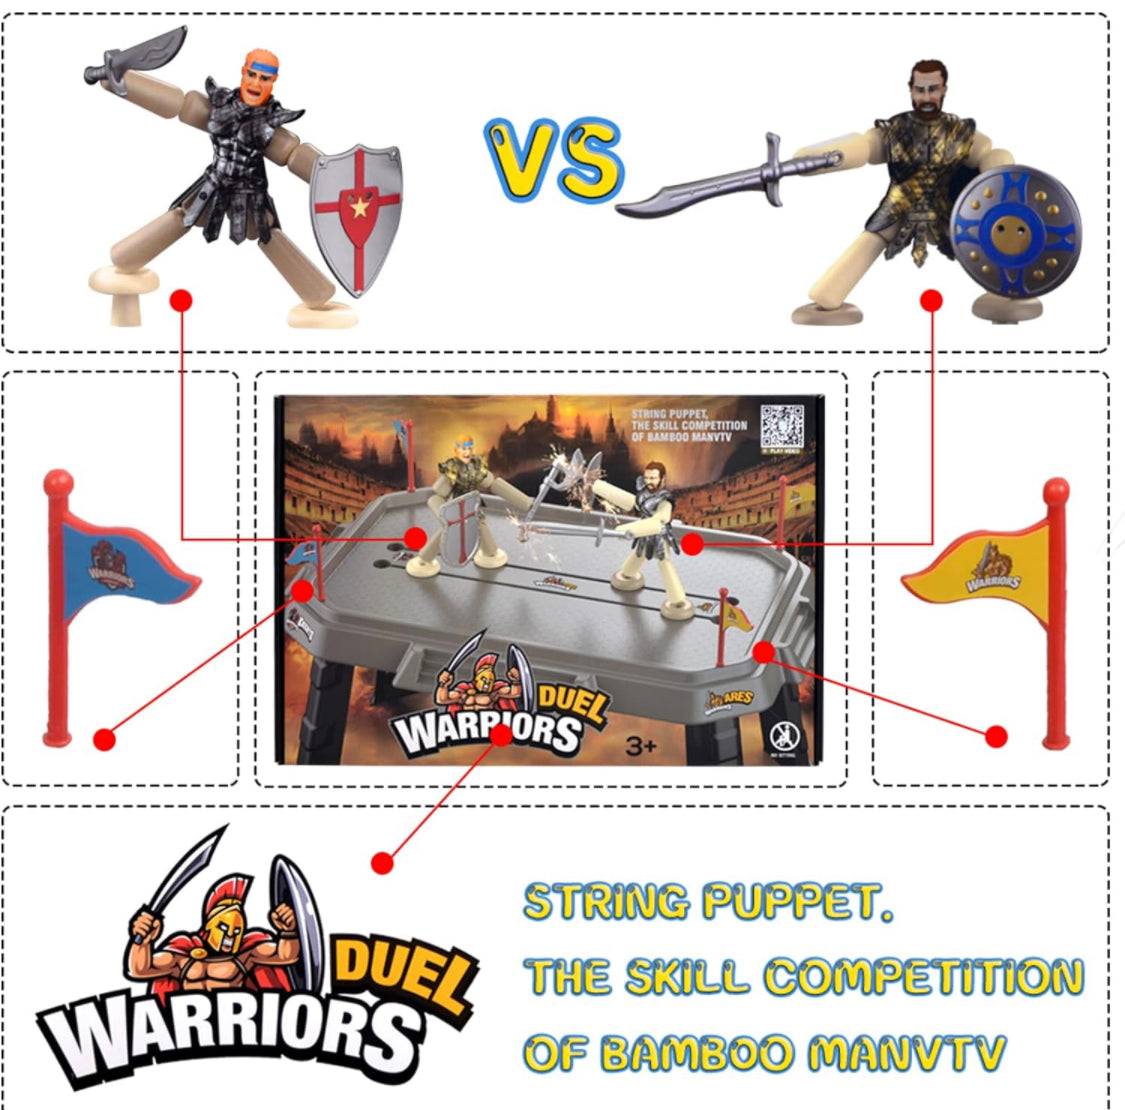 Ultimate Arcade Warriors Ultimate Battle Arena Action Figure,Dual Warrior Cold Weapons Duel Interactive Game